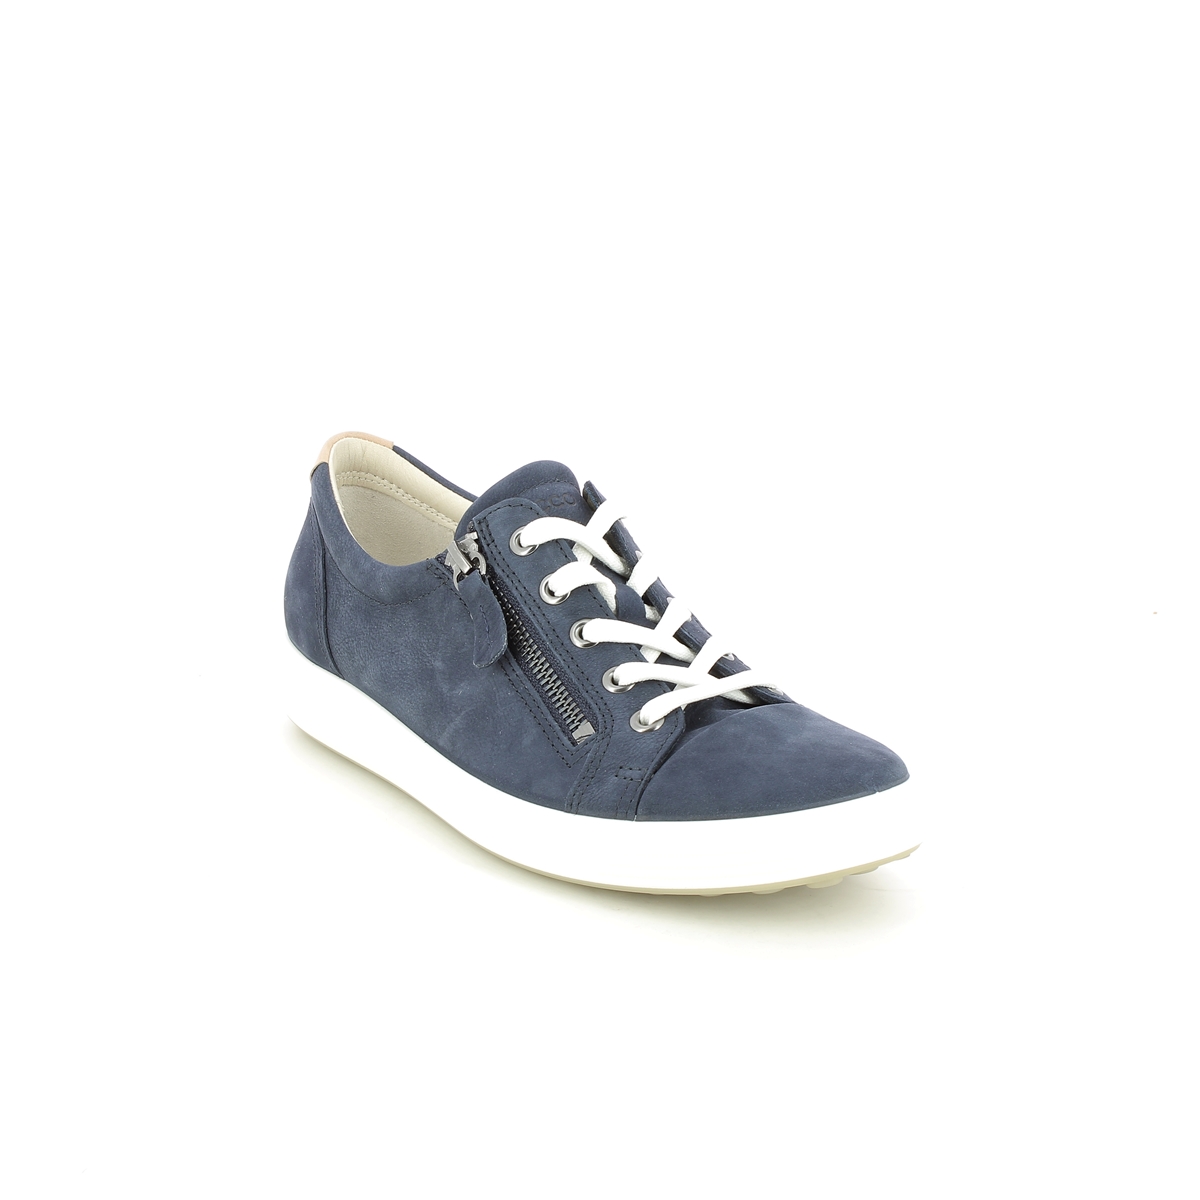 Ecco Soft 7 Lace Zip Navy Nubuck Womens Trainers 430853-02303 In Size 40 In Plain Navy Nubuck